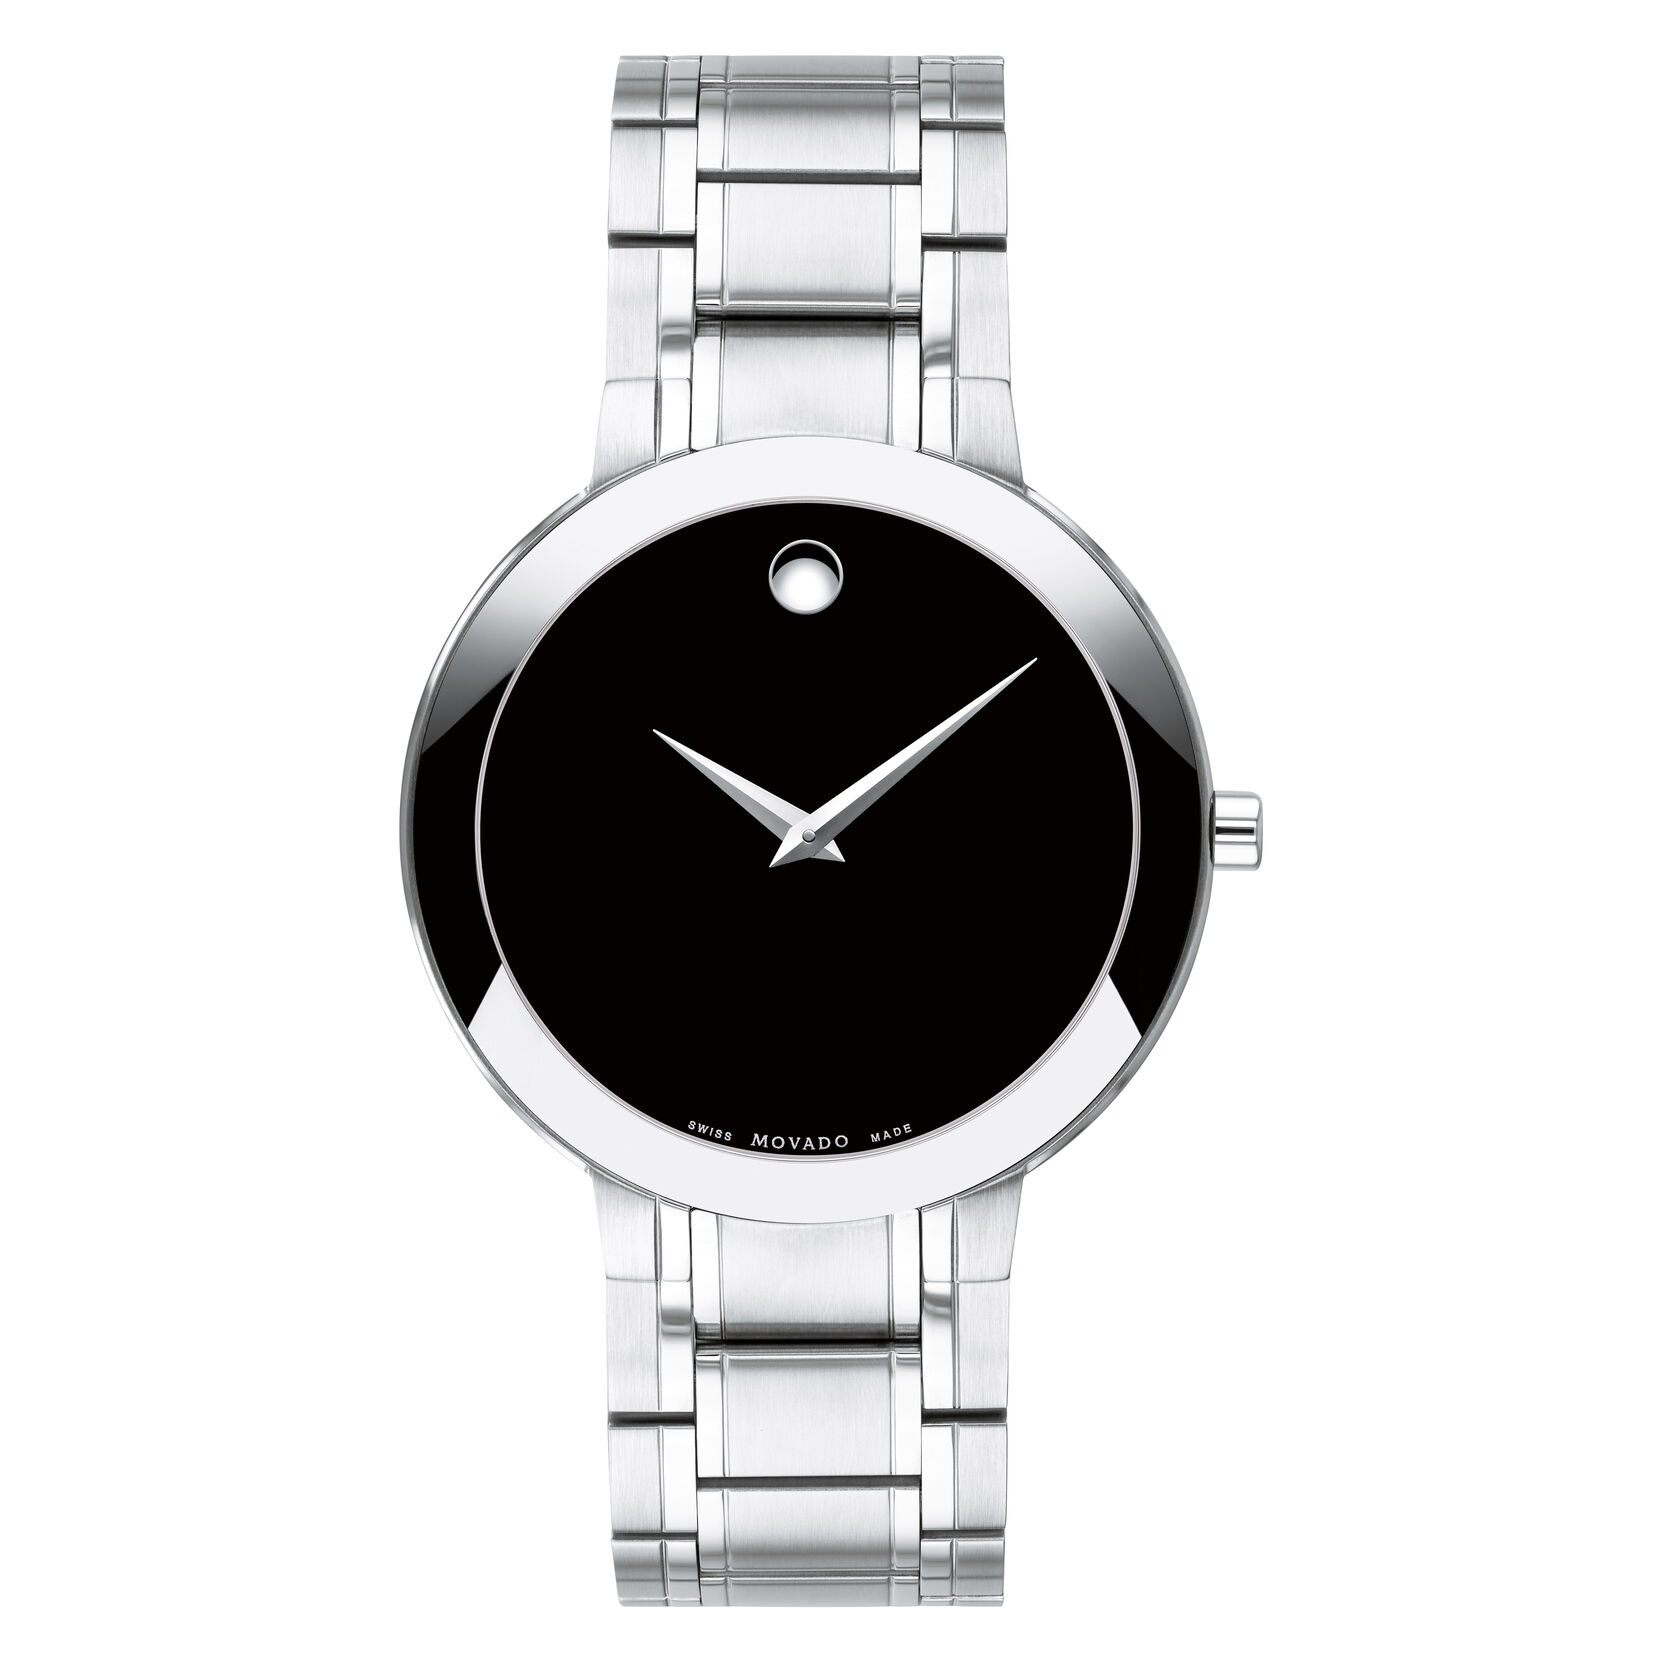 Movado | Movado Company Store |Men's Stiri watch, 40mm stainless steel case  and link bracelet